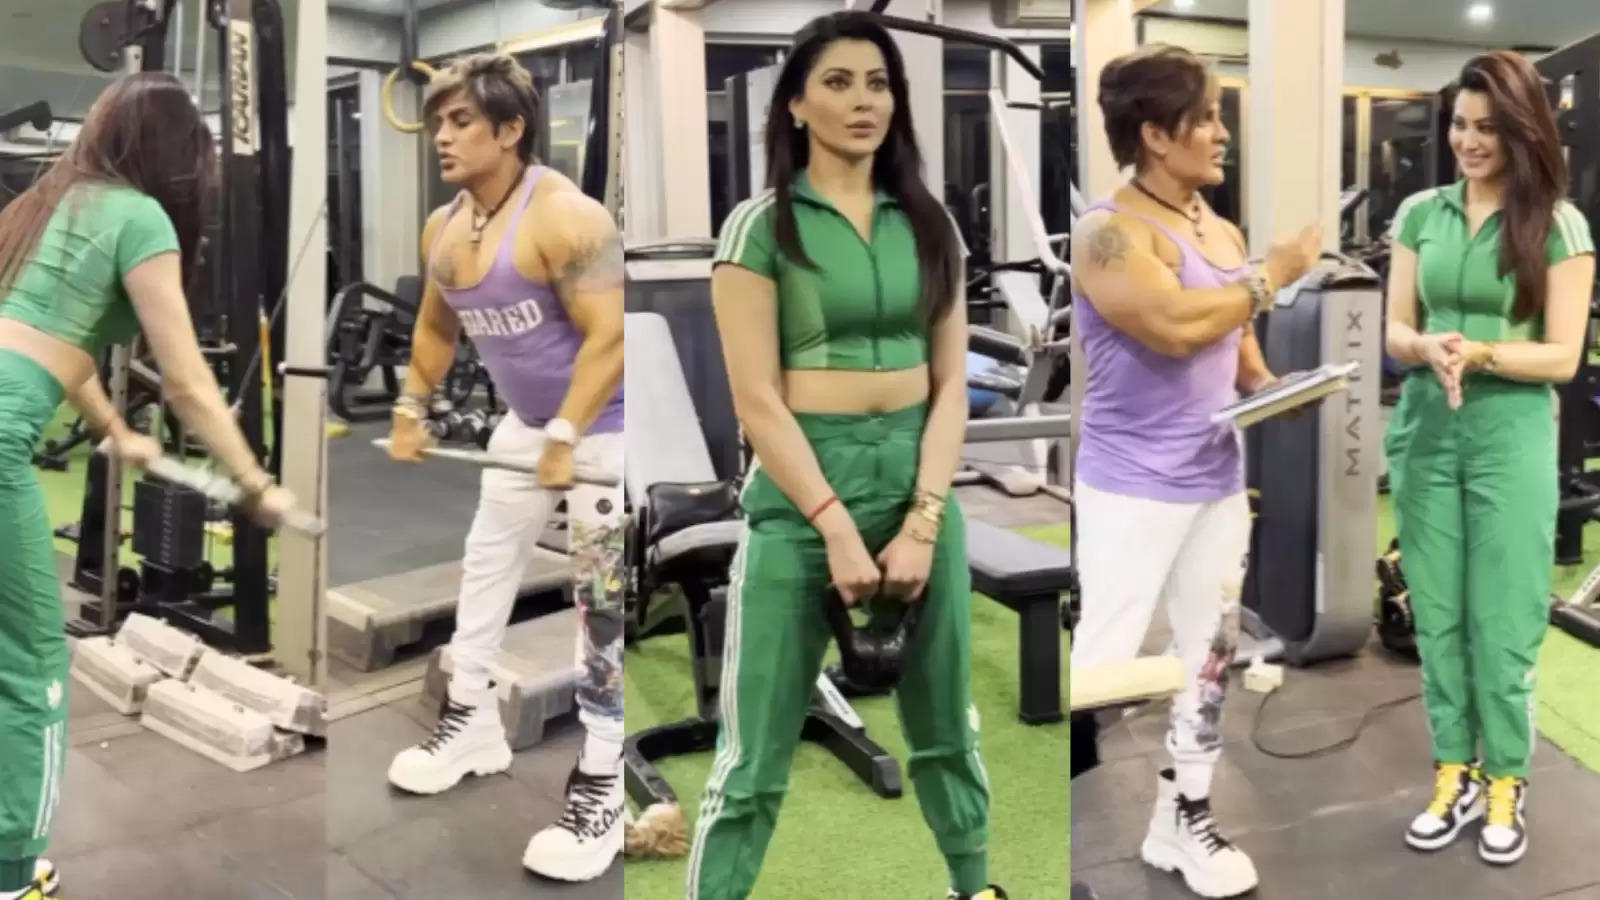 "Urvashi Rautela is absolutely stunning and a fitness icon" says Yash Birla as their workout video goes viral